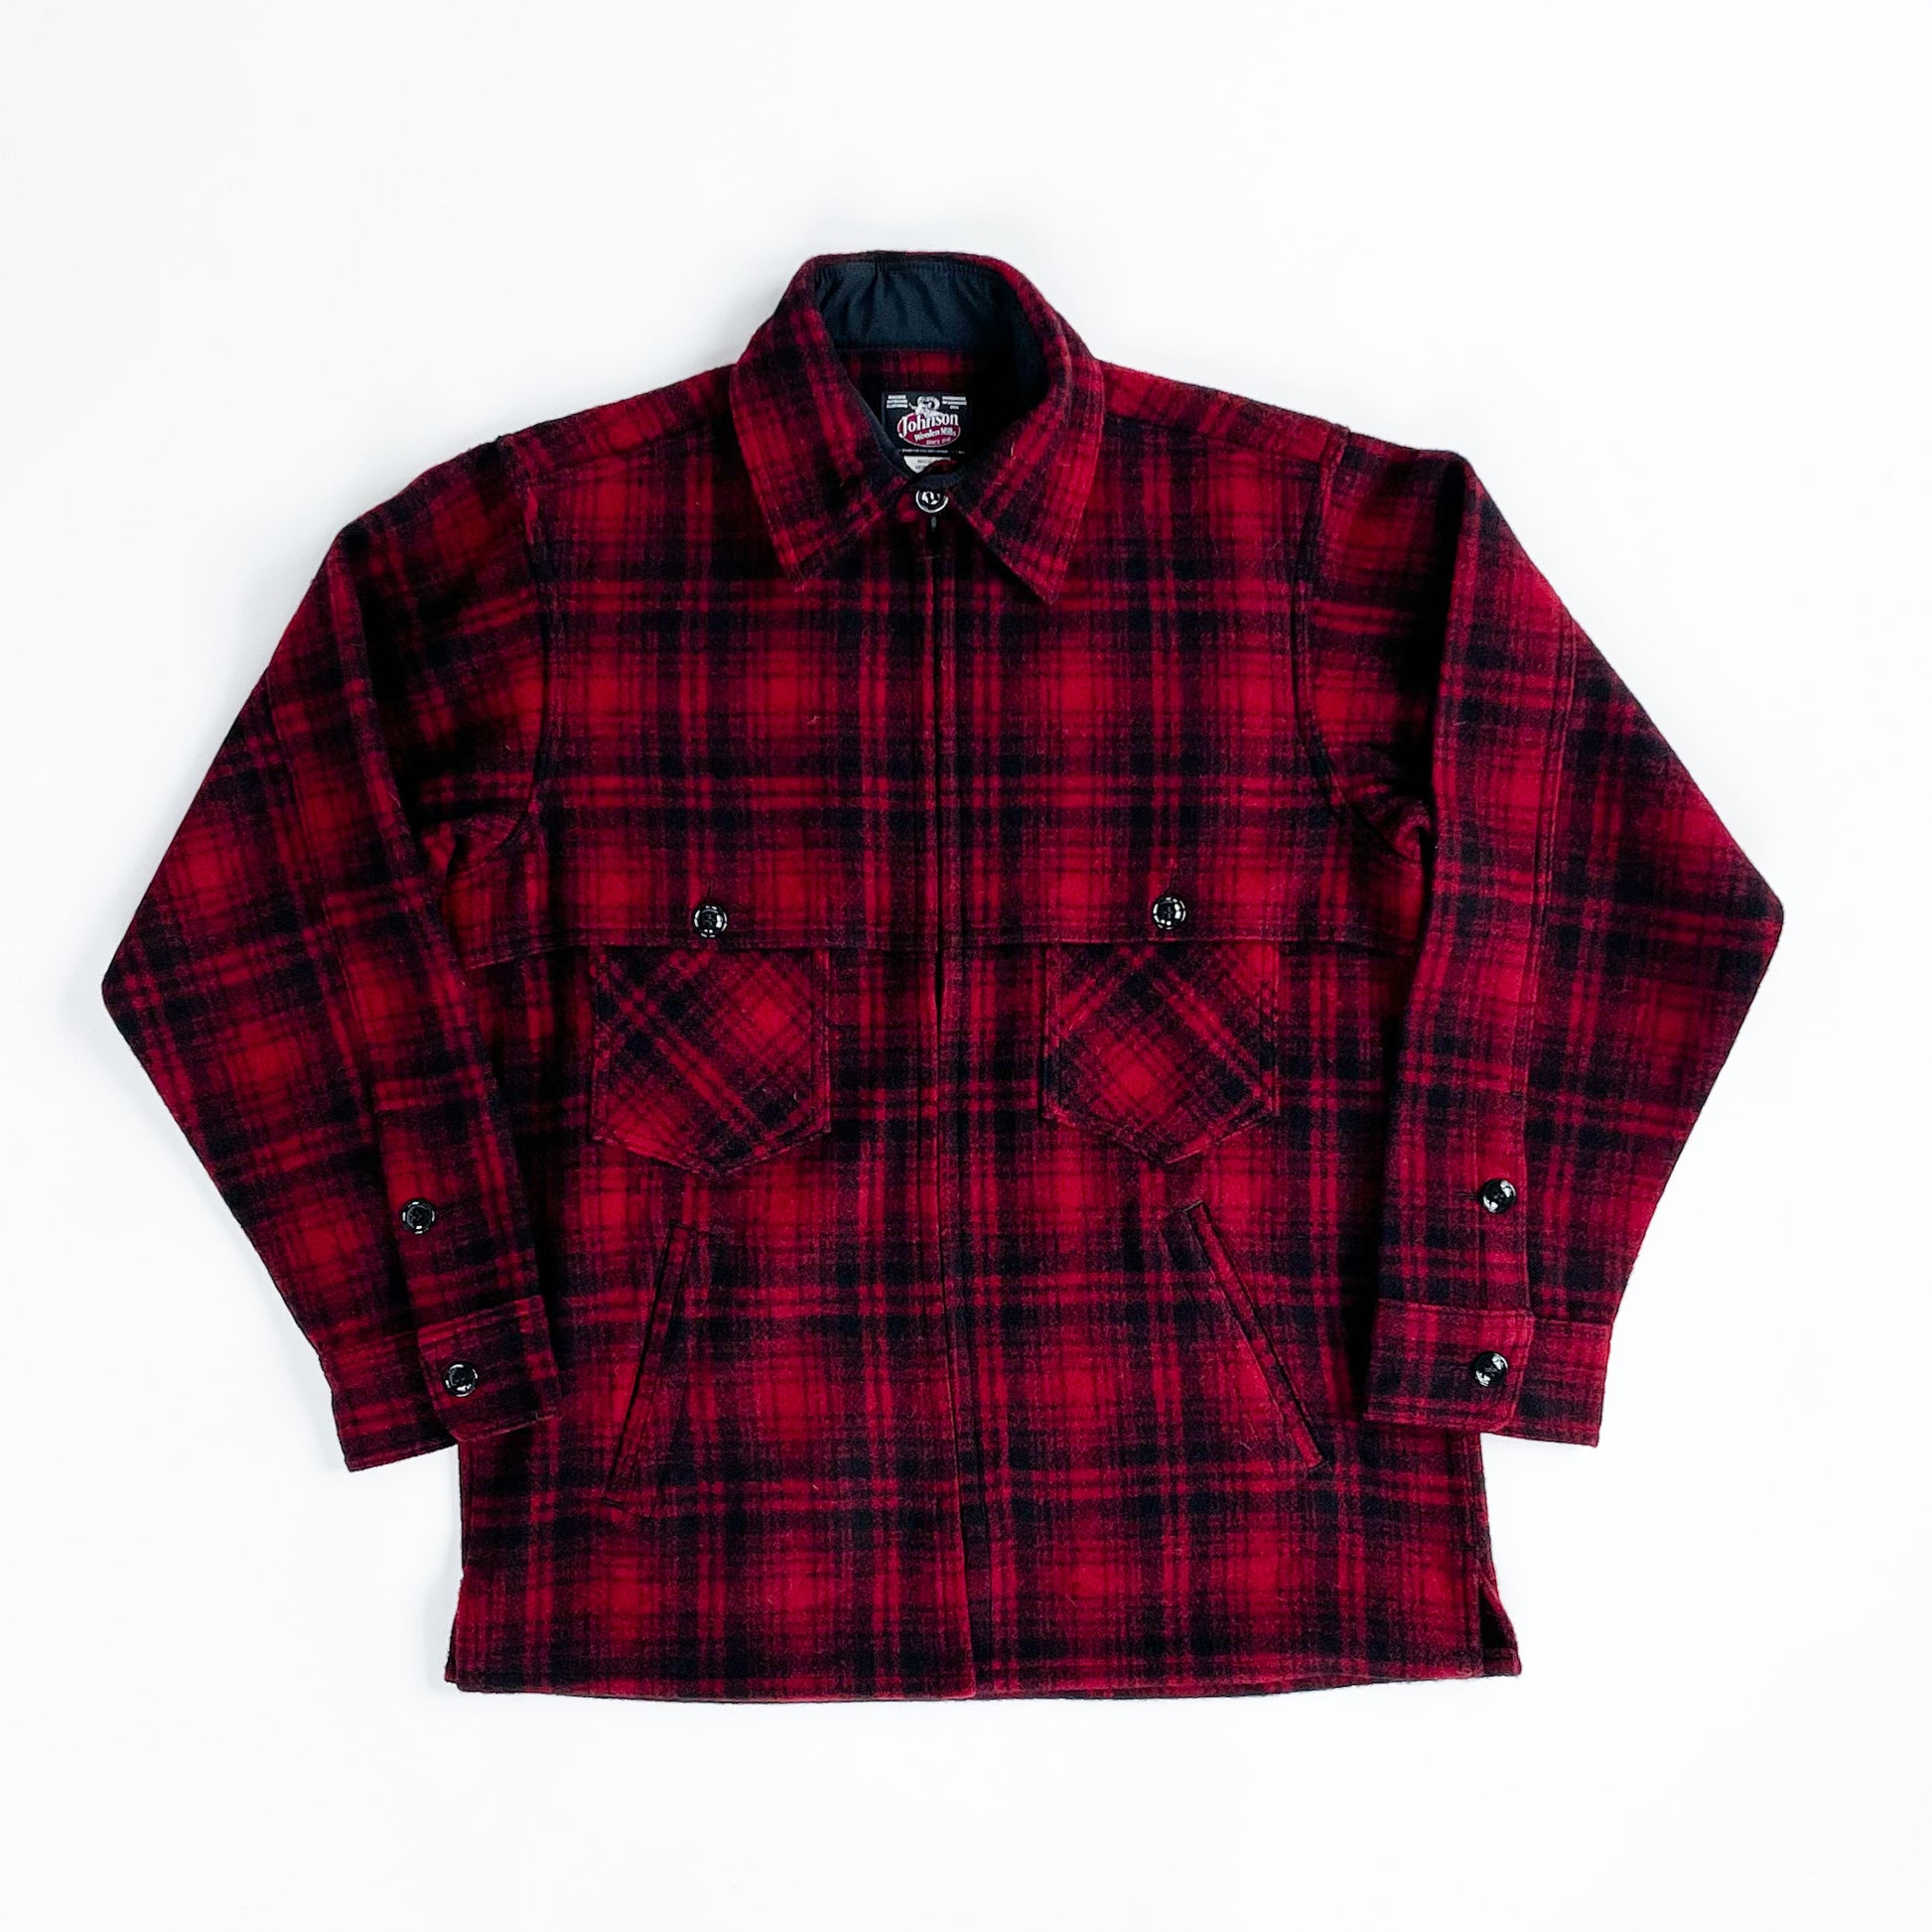 Double Cape Jac Shirt - Red Black Muted Plaid – Johnson Woolen Mills